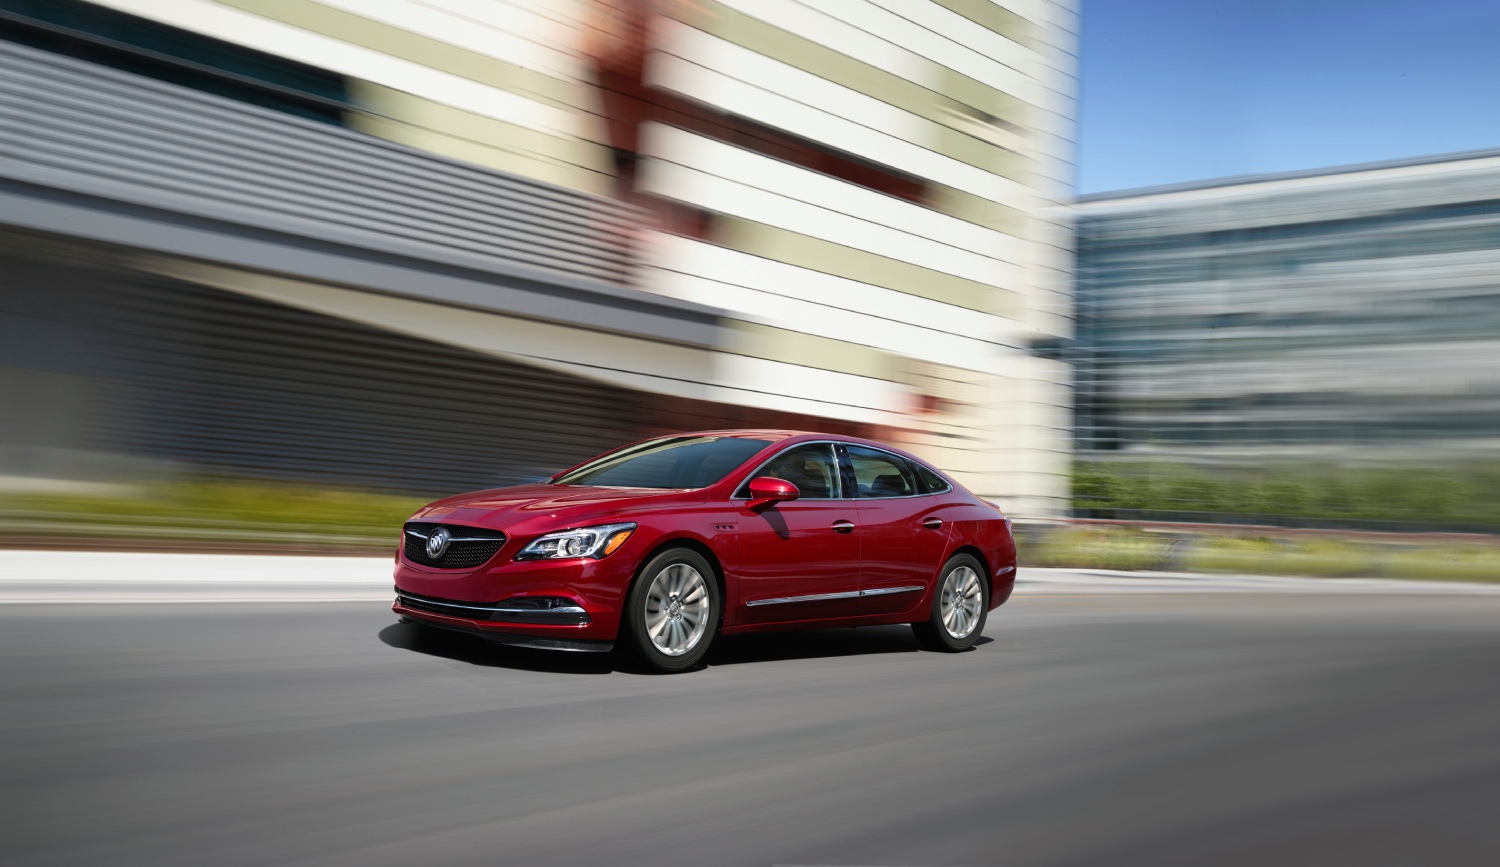 14 people bought a Buick LaCrosse sedan like this red one last year